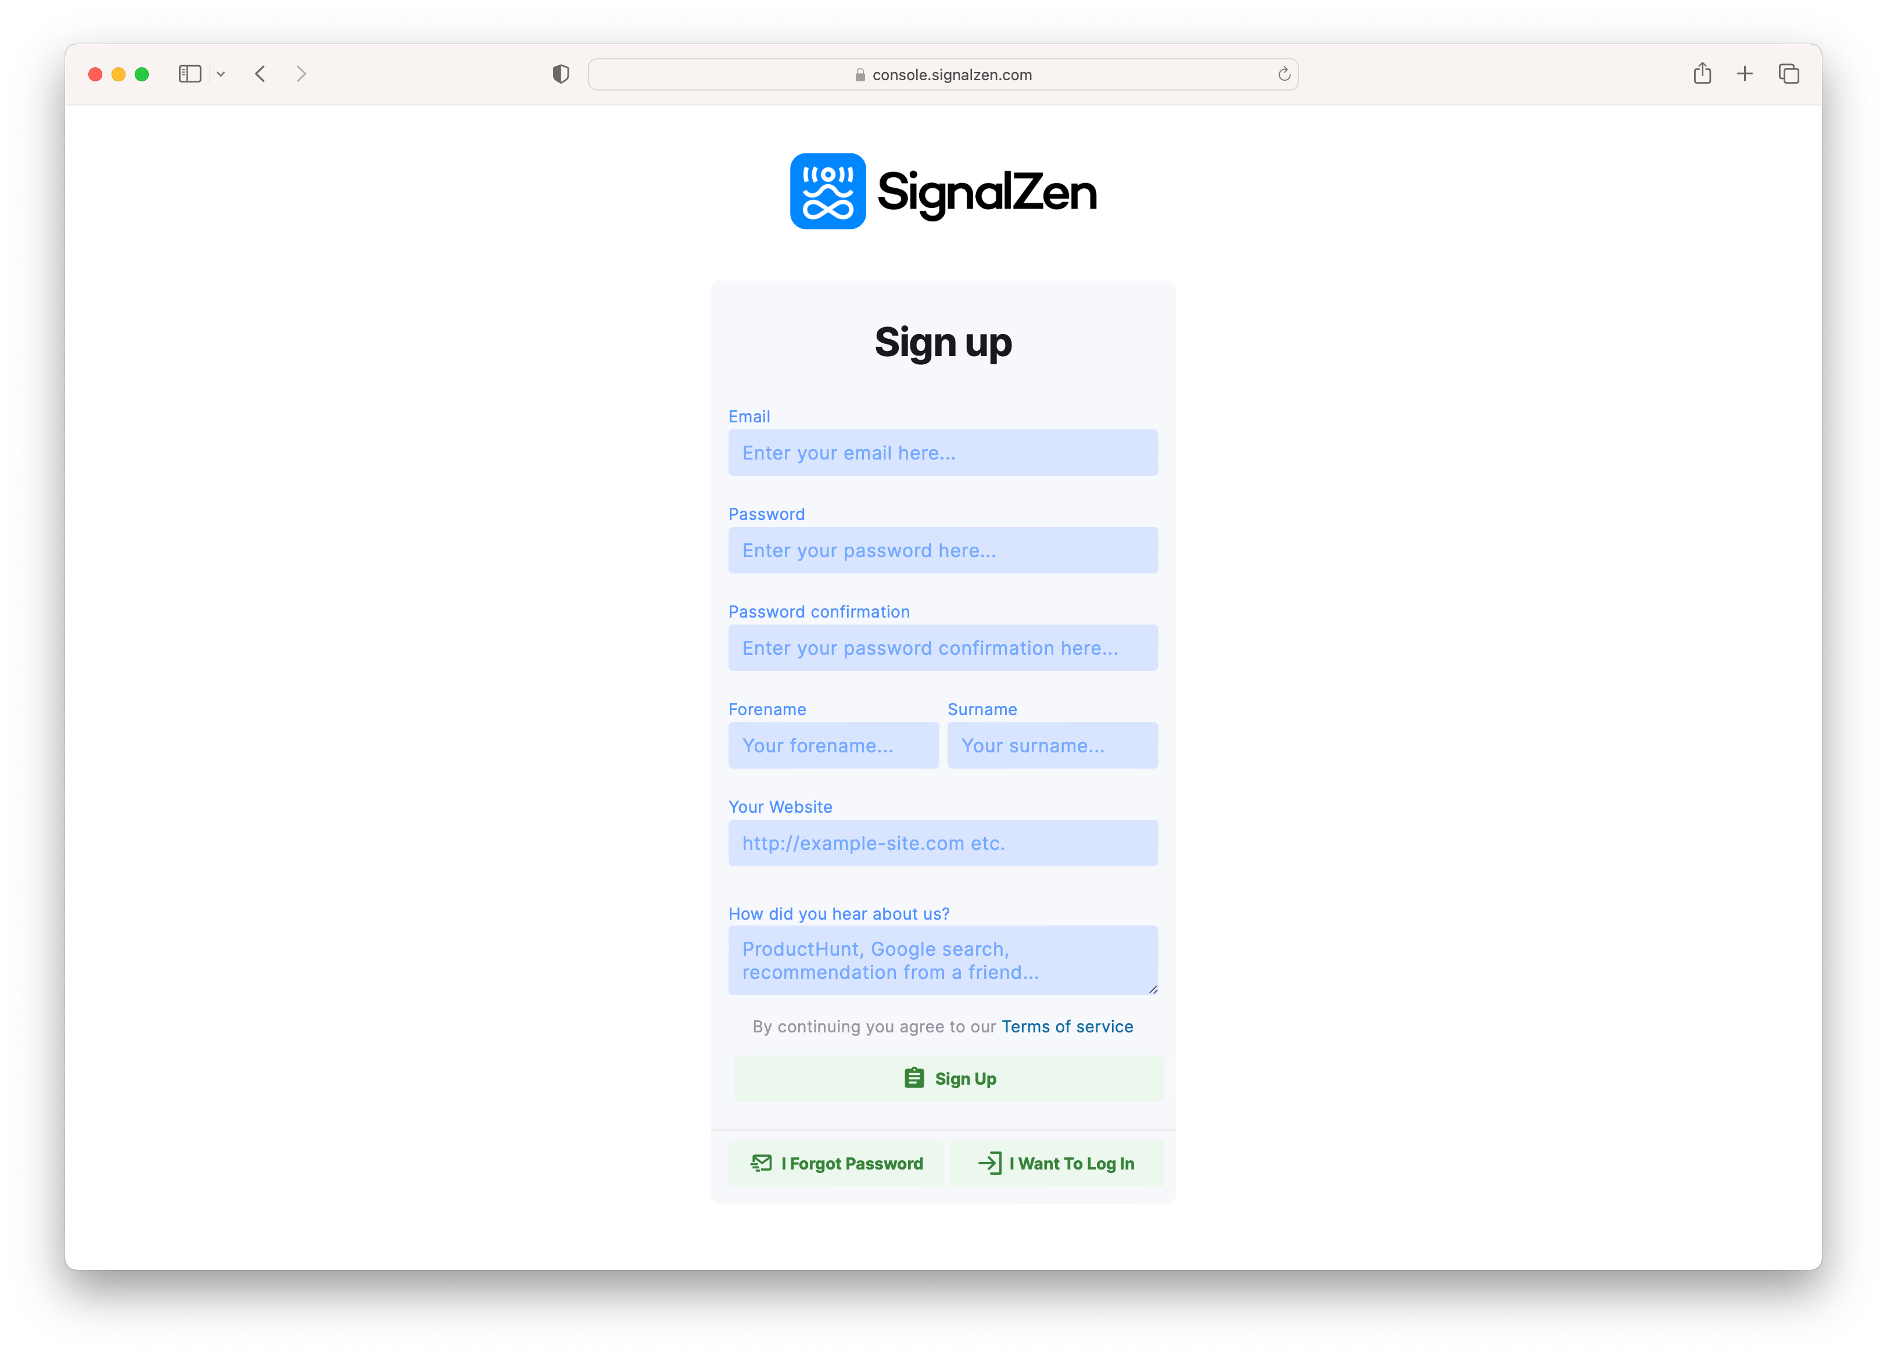 Sign up to SignalZen